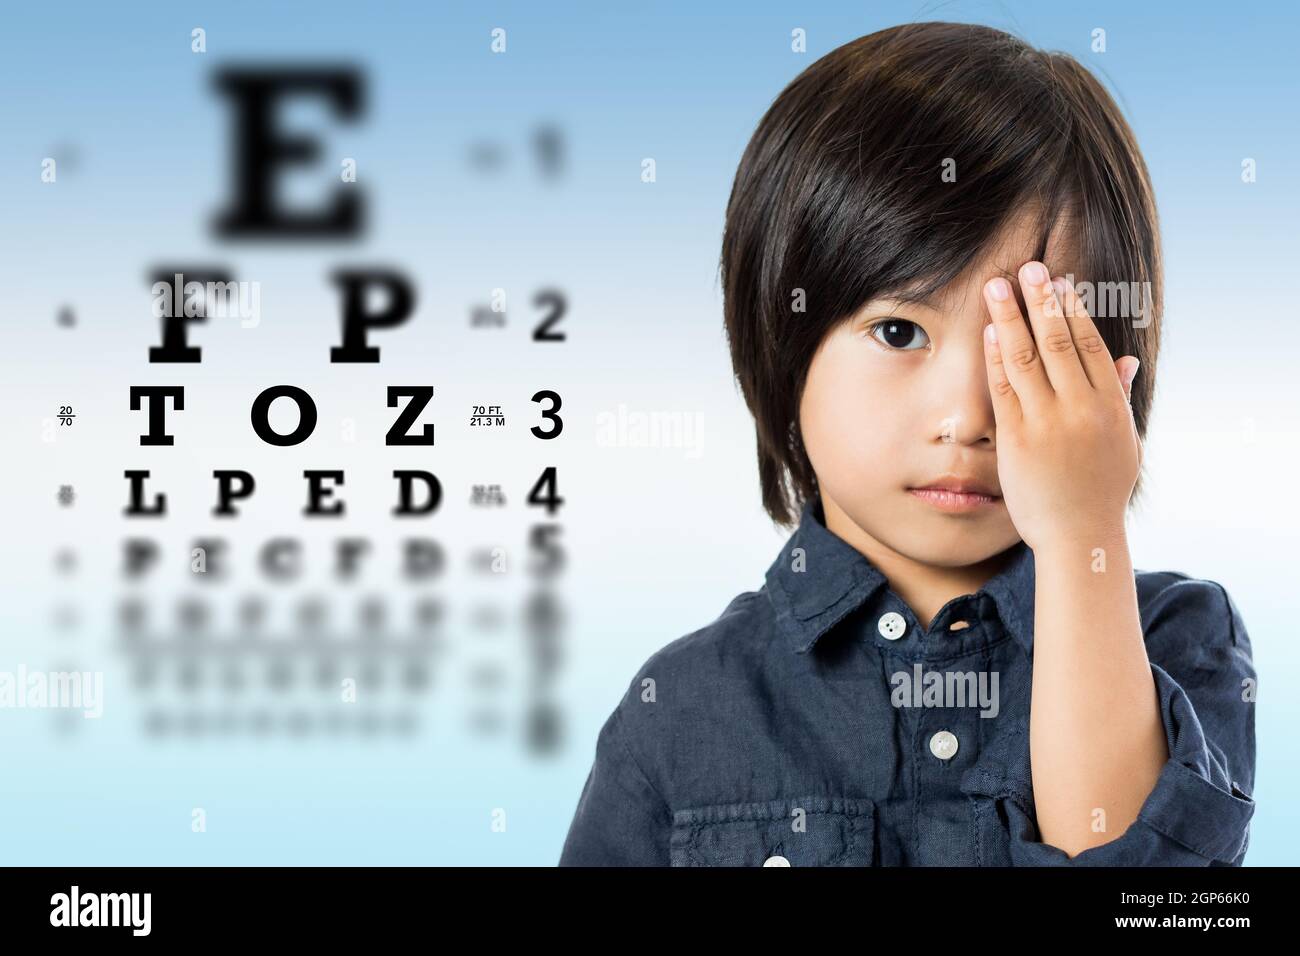 Close up portrait of handsome little asian boy testing eyesight.Kid closing one eye with hand against alphabetical out of focus eye test chart in back Stock Photo